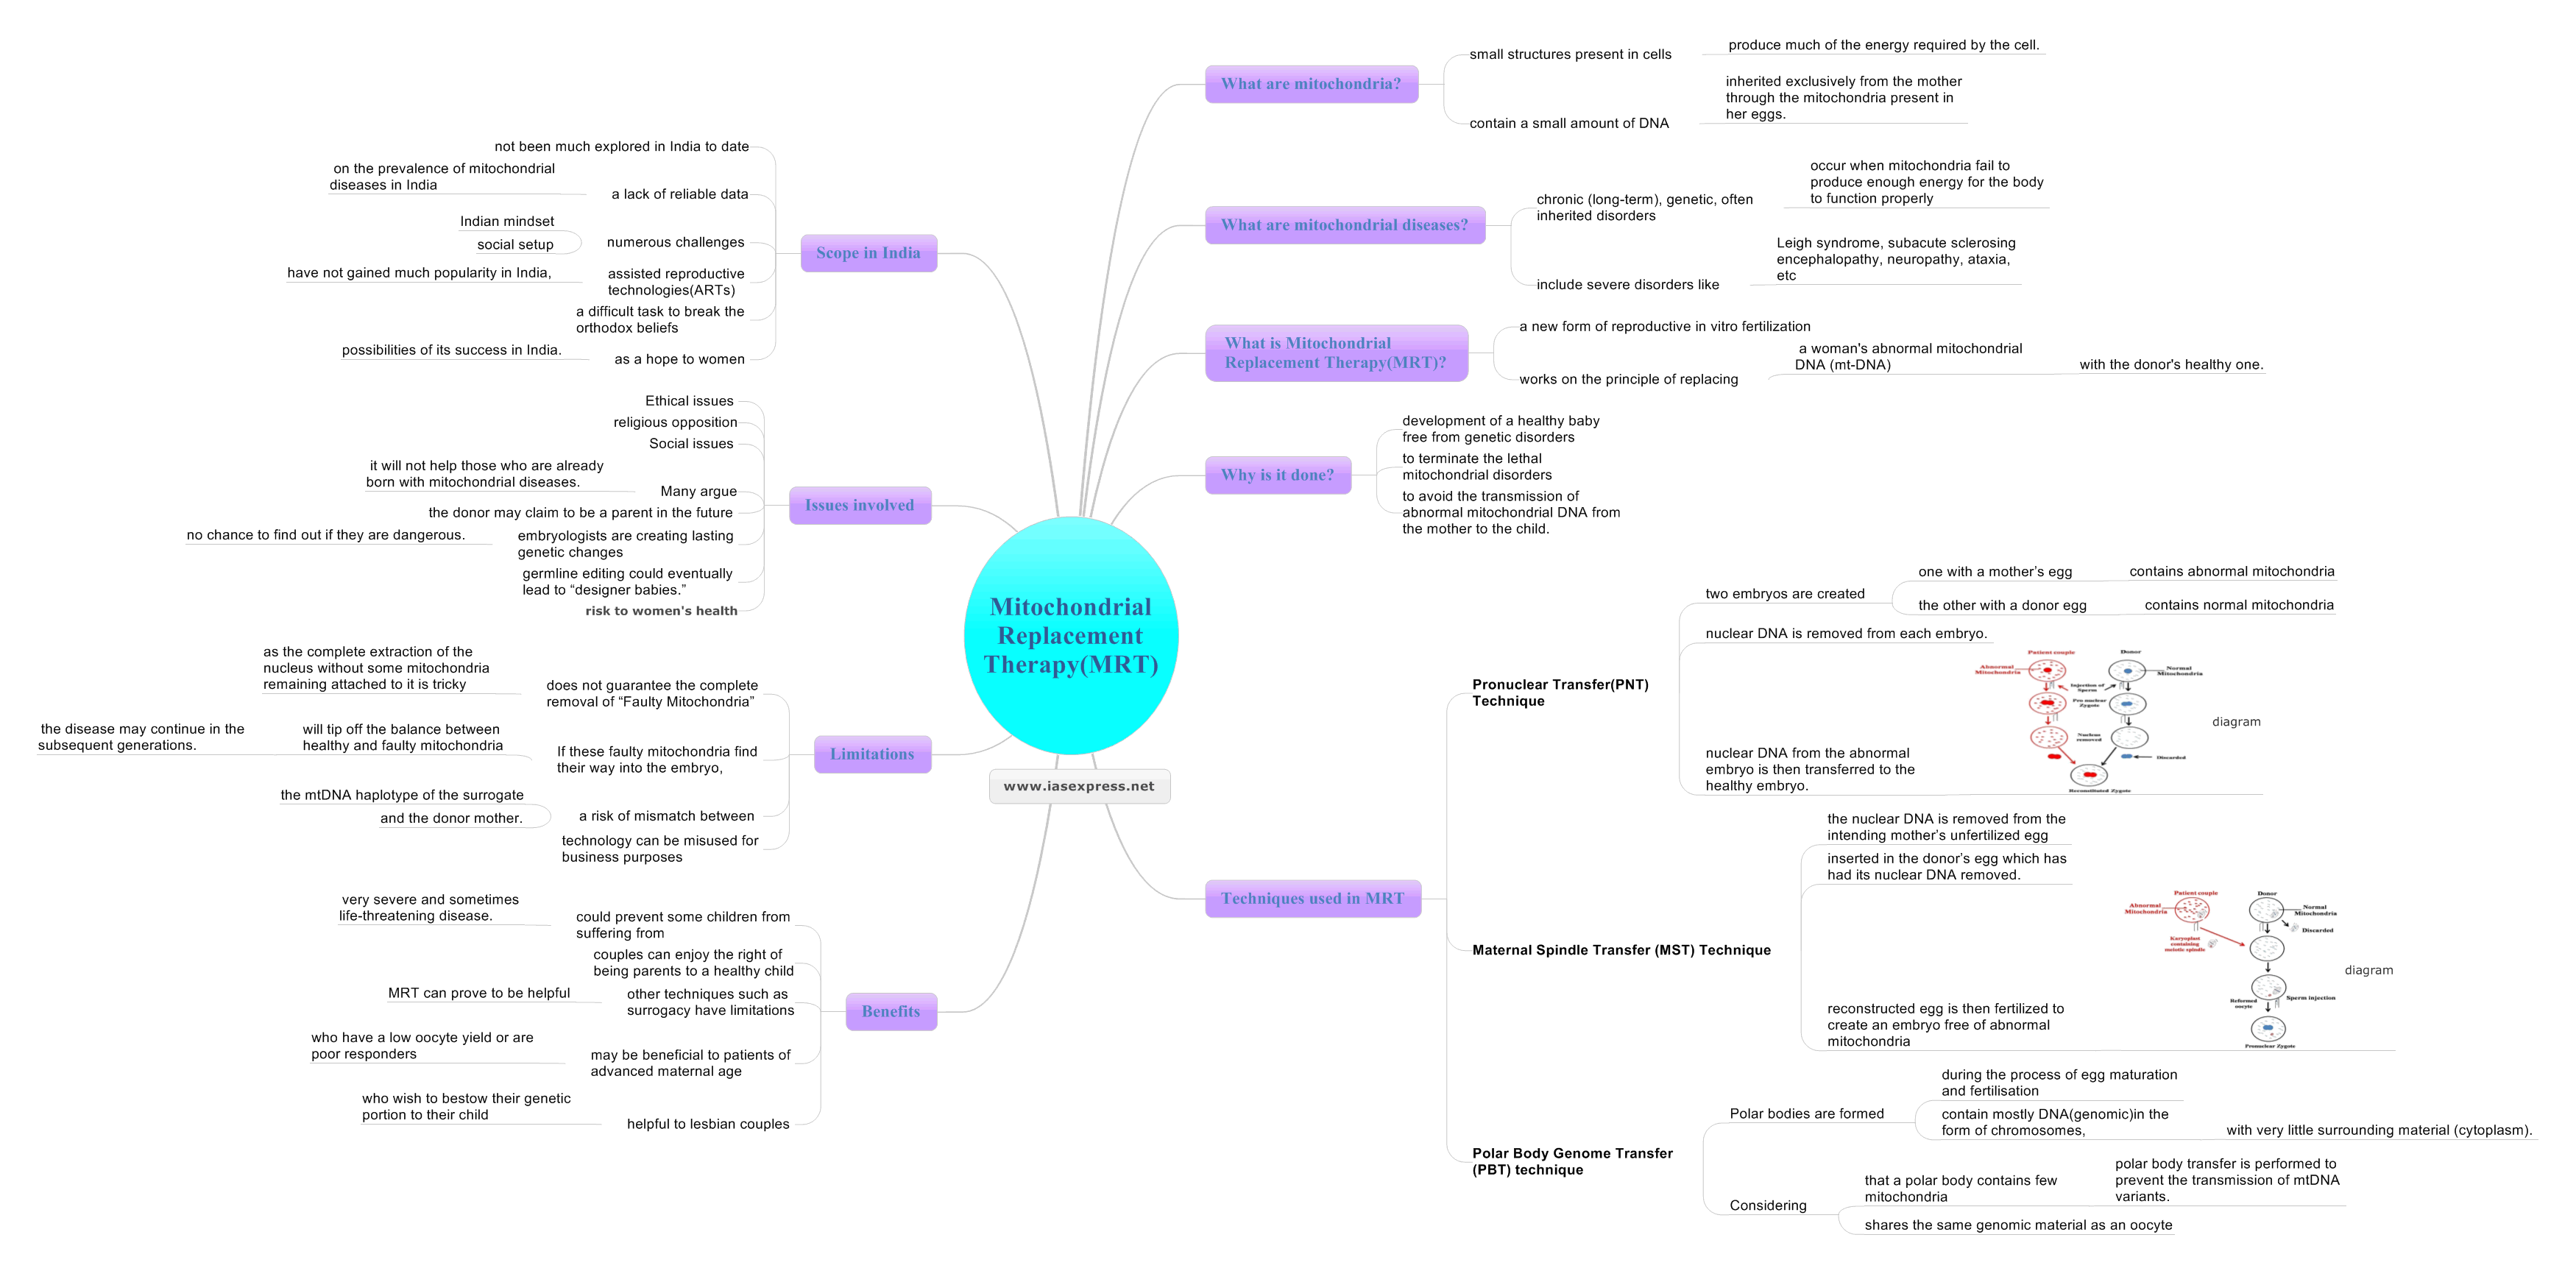 Mitochondrial-Replacement-TherapyMRT mindmap